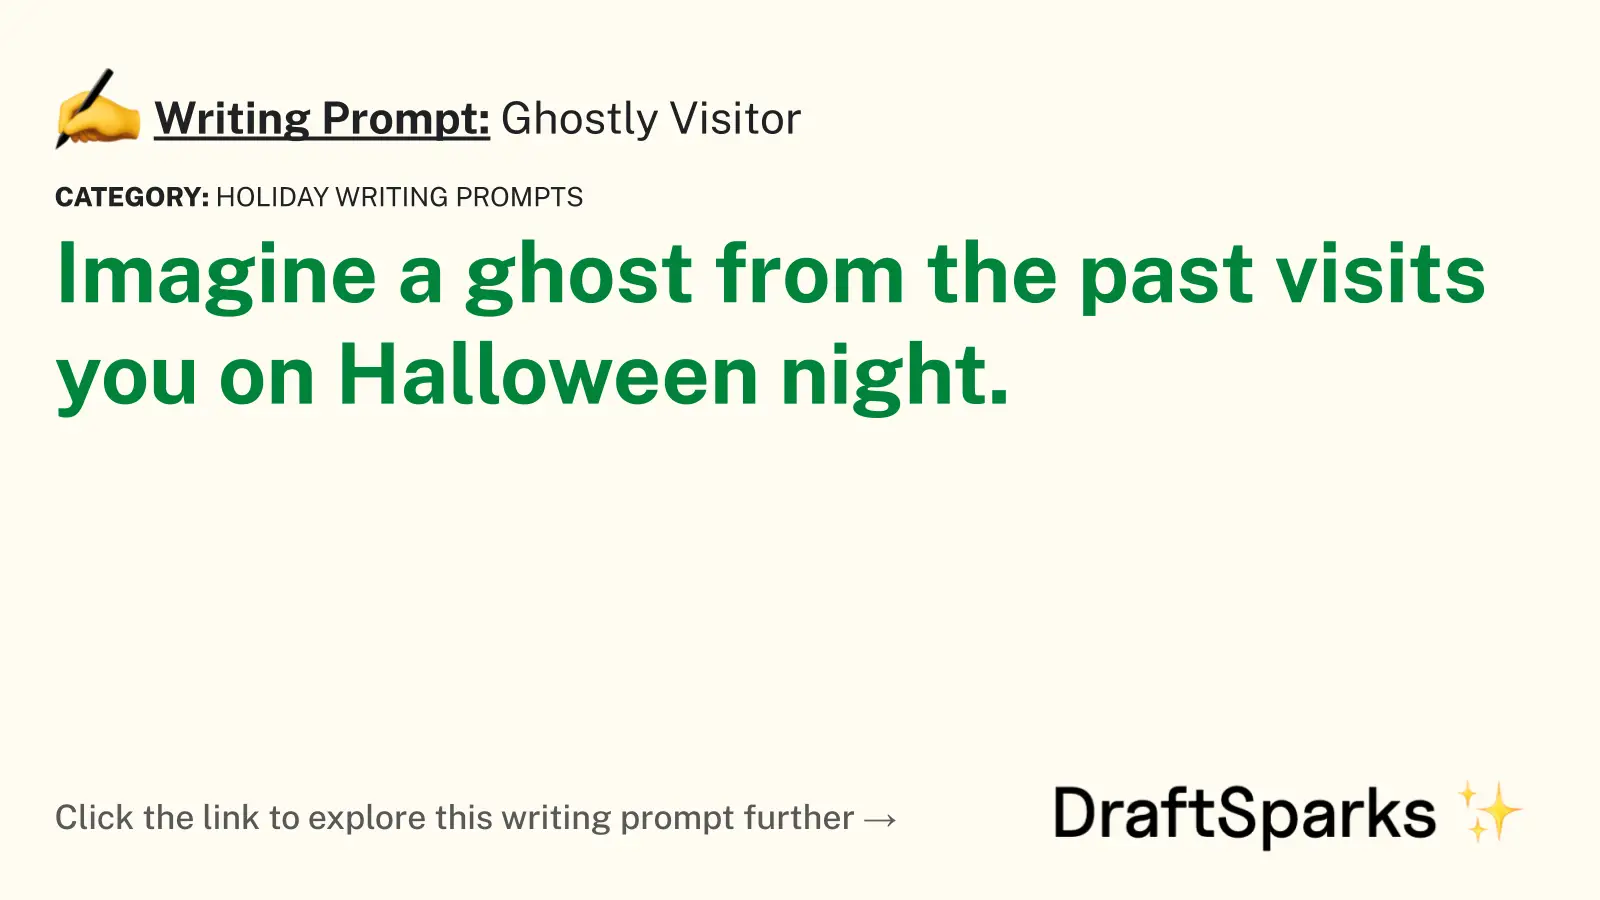 Ghostly Visitor